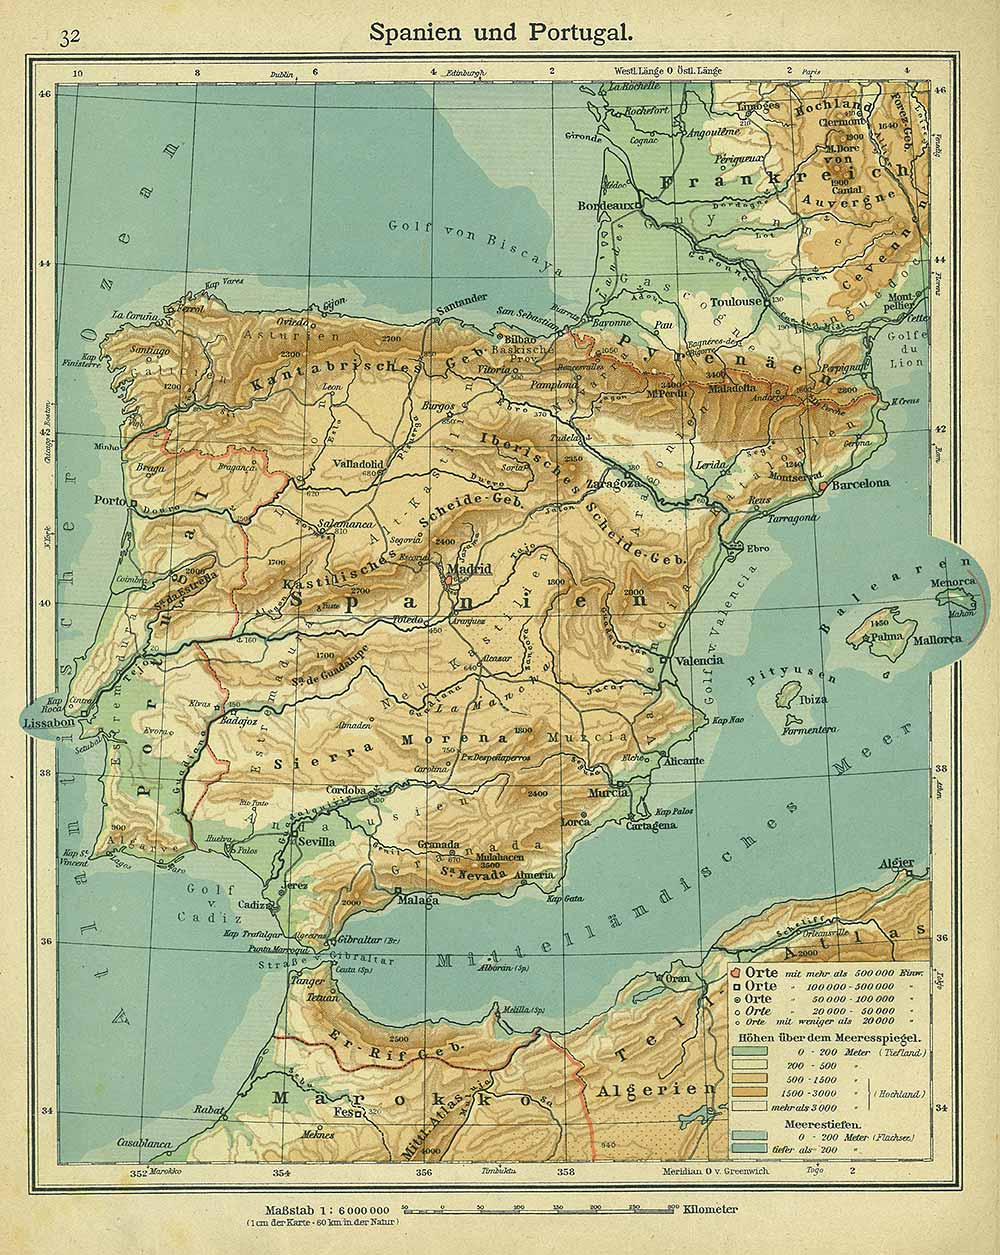 Spain and Portugal, Andrees 'Berliner Schul-Atlas', 1916, page 32, published size to print borders 21.26 cm wide by 26.31 cm high.